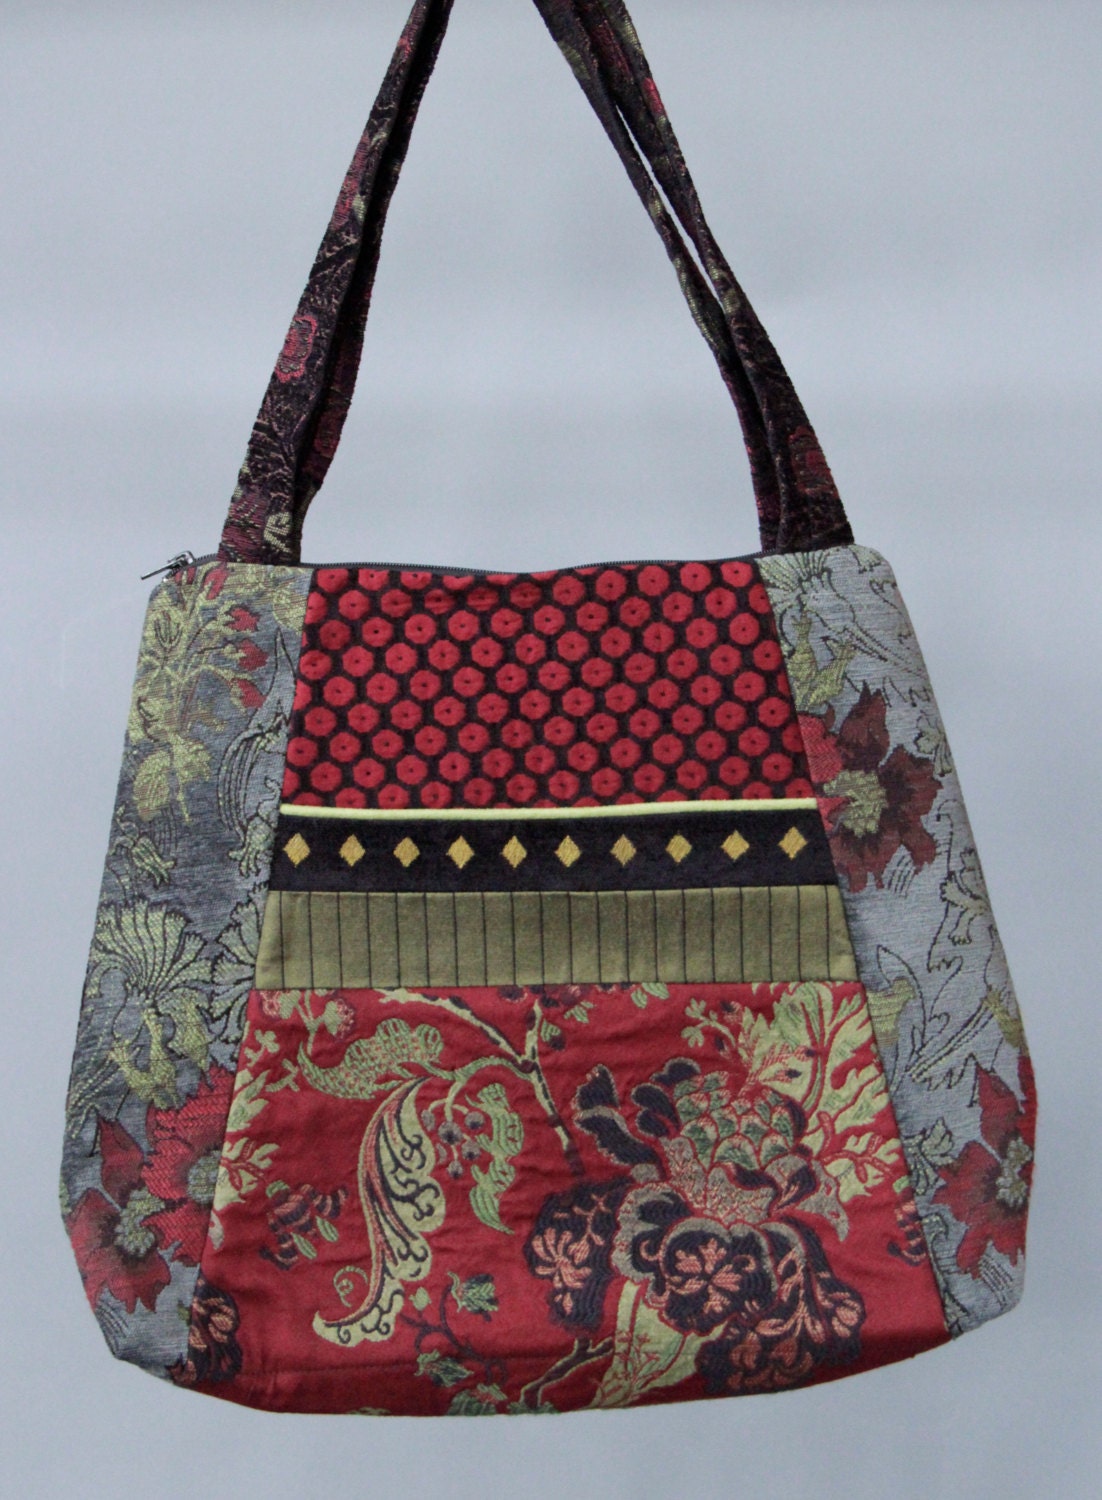 Slate Tapestry Tote Bag in Gray and Red Floral Upholstery Fabric Large